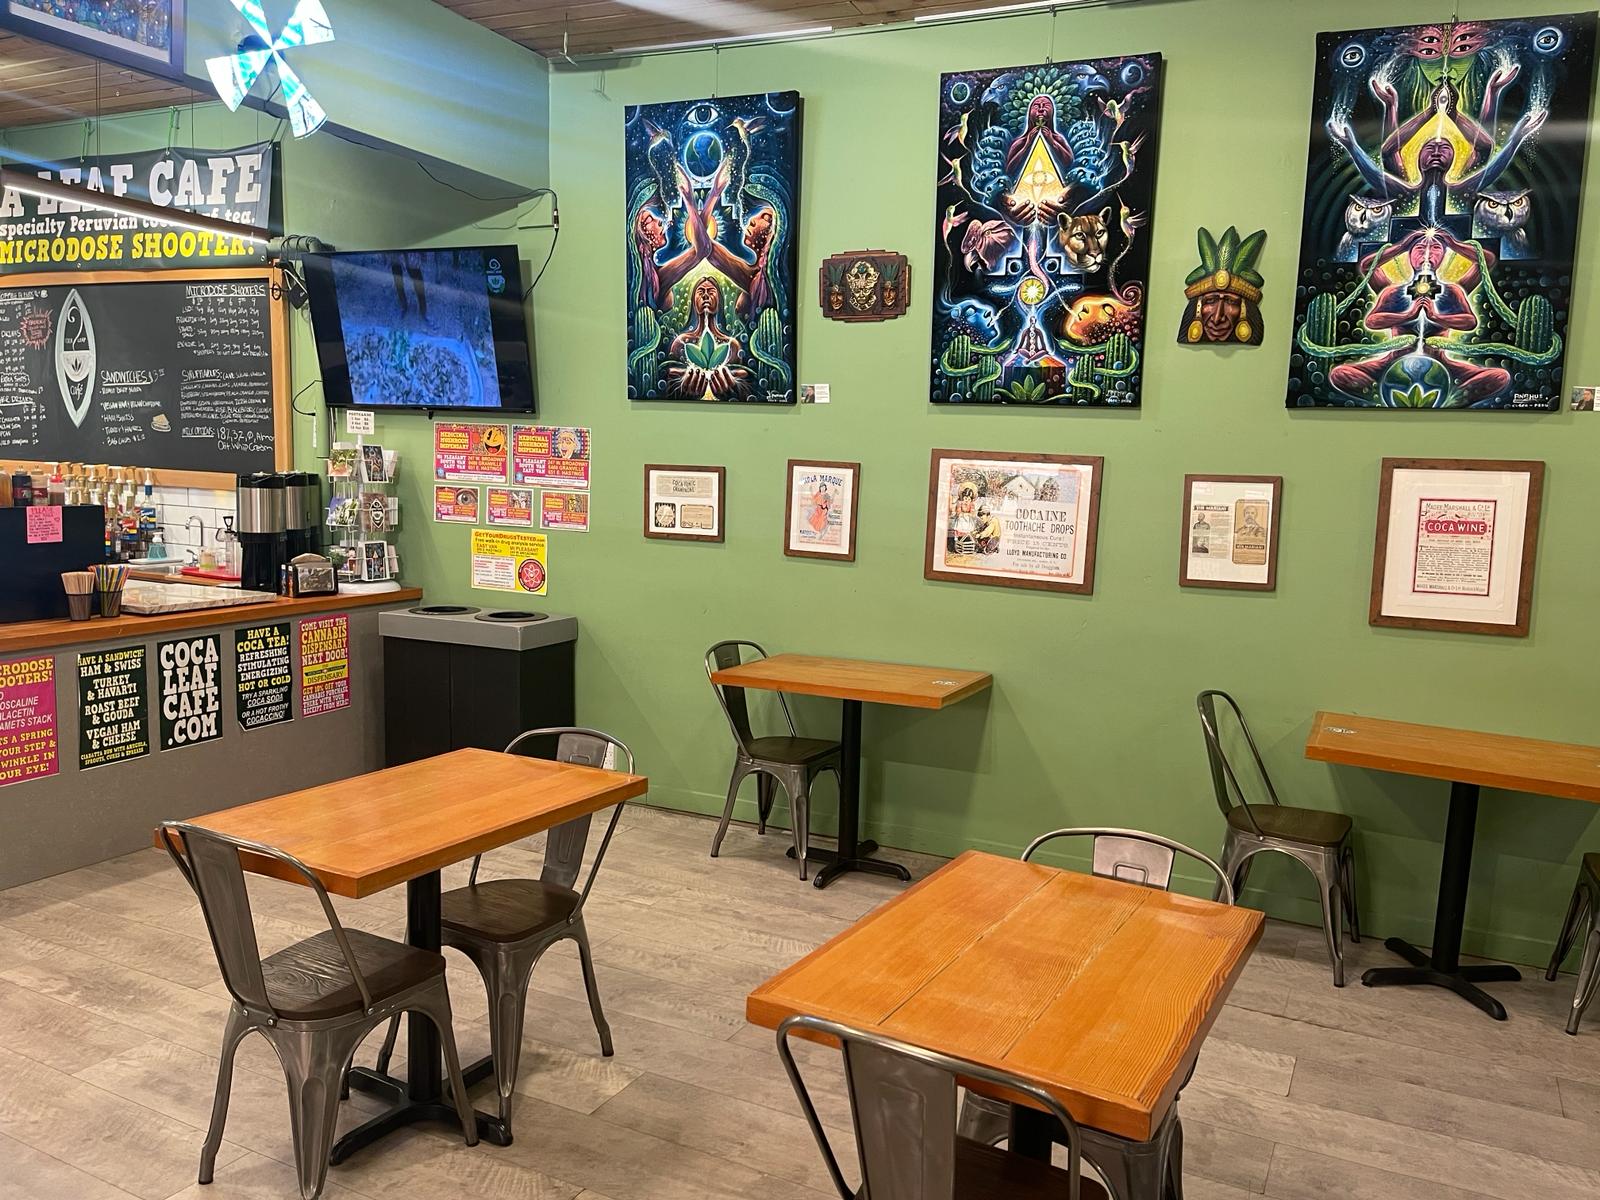 A photo of the inside of the cafe, showing tables and chairs and psychedelic art on the walls.